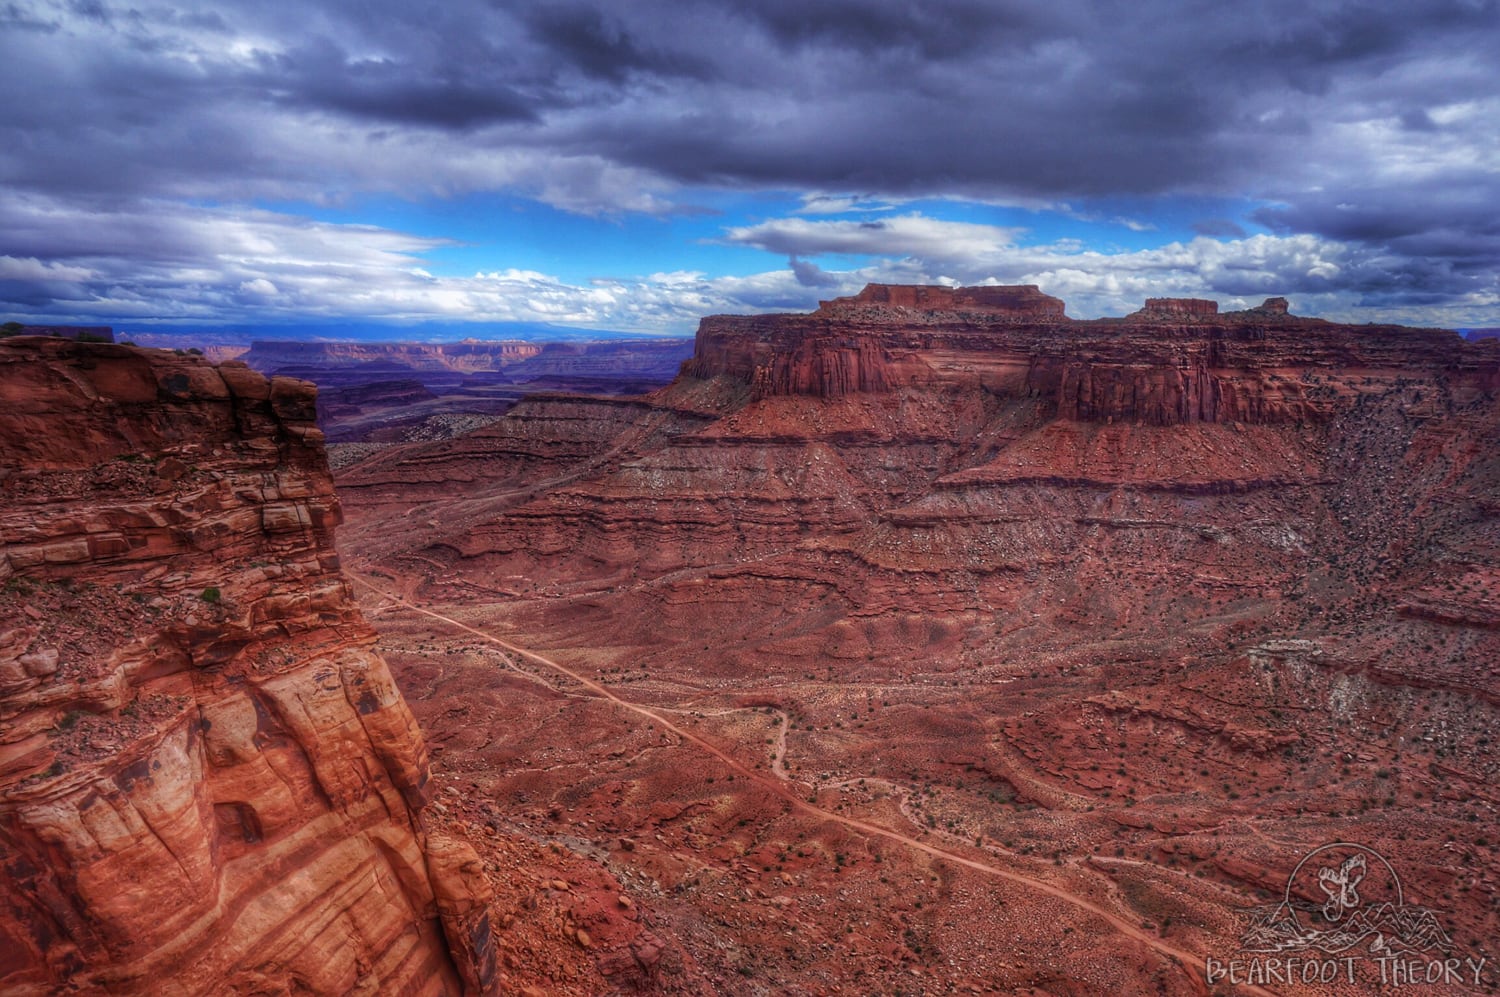 Island in the Sky // Explore Utah National Parks in this 9-day road trip itinerary with the best hikes, activities & camping in Zion, Bryce, Capitol Reef, Arches & Canyonlands.